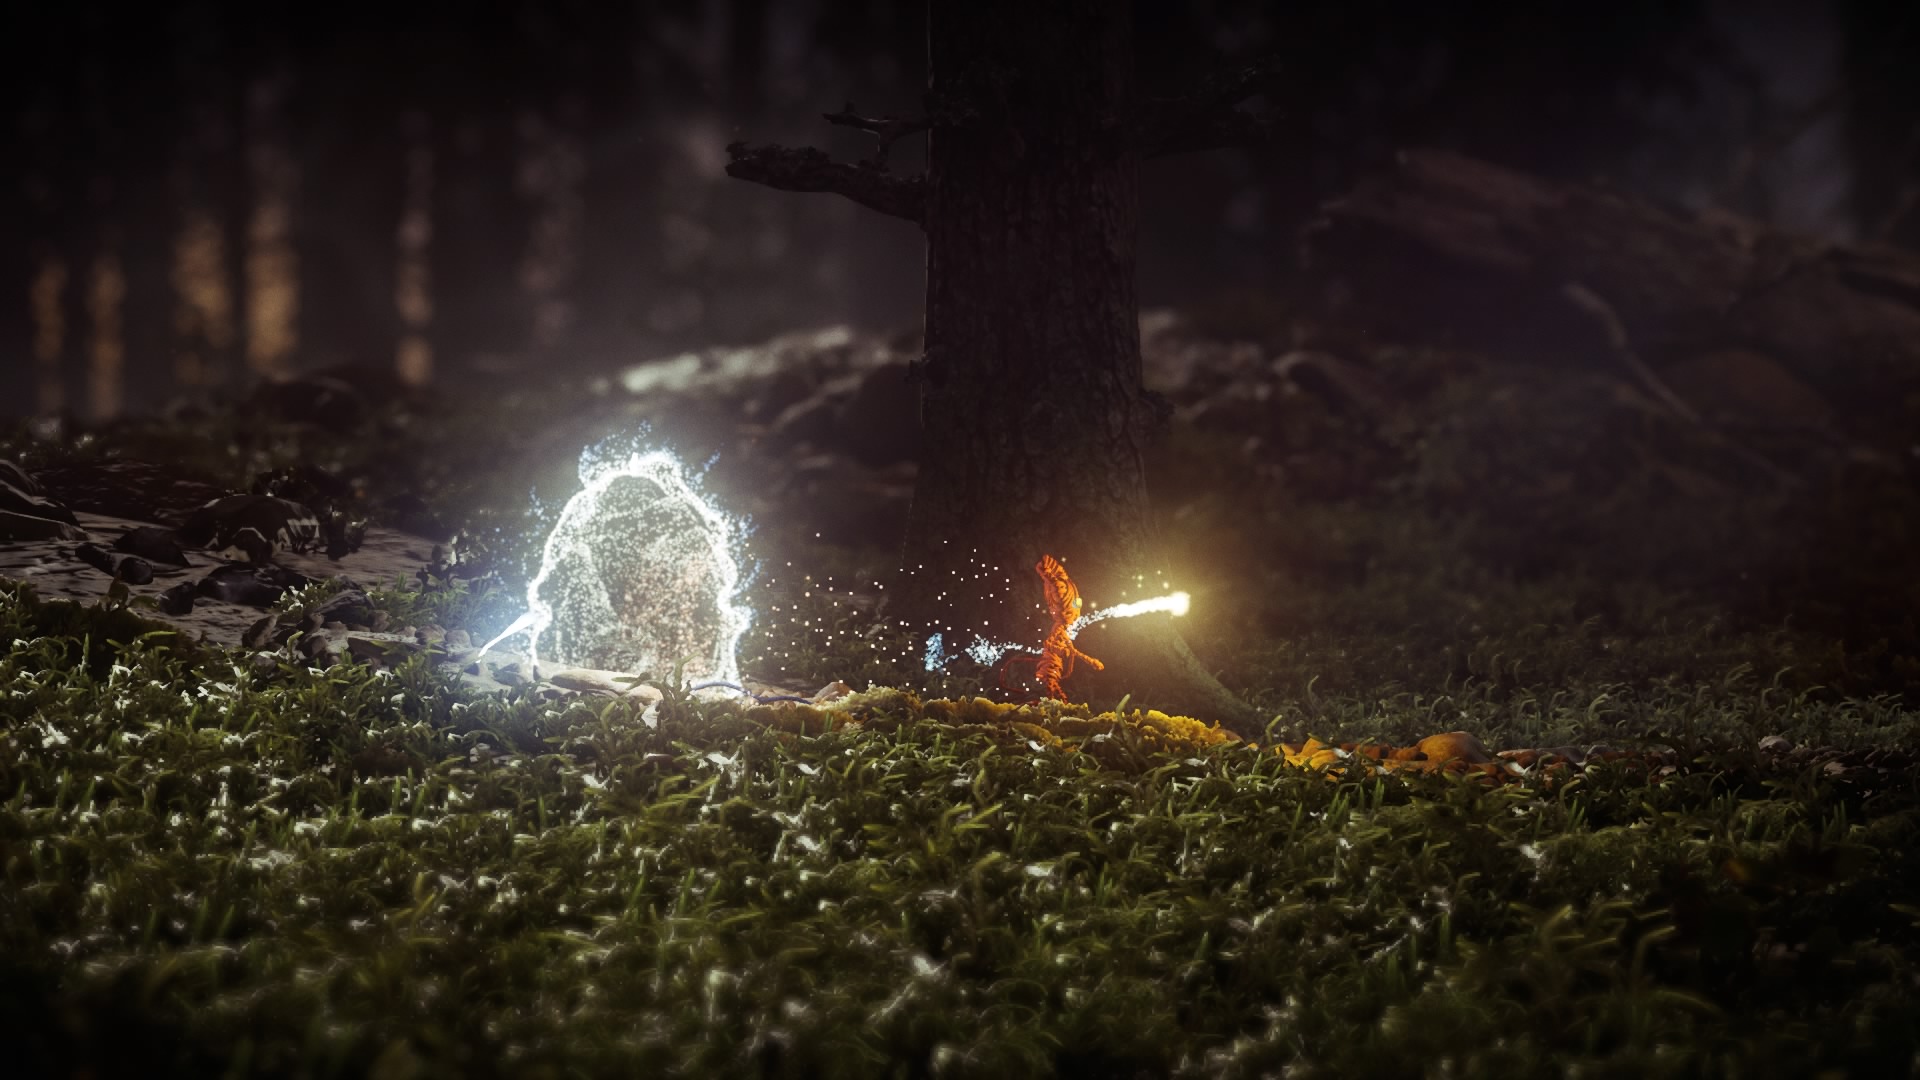 Epic Yarny? Unravel 2 review